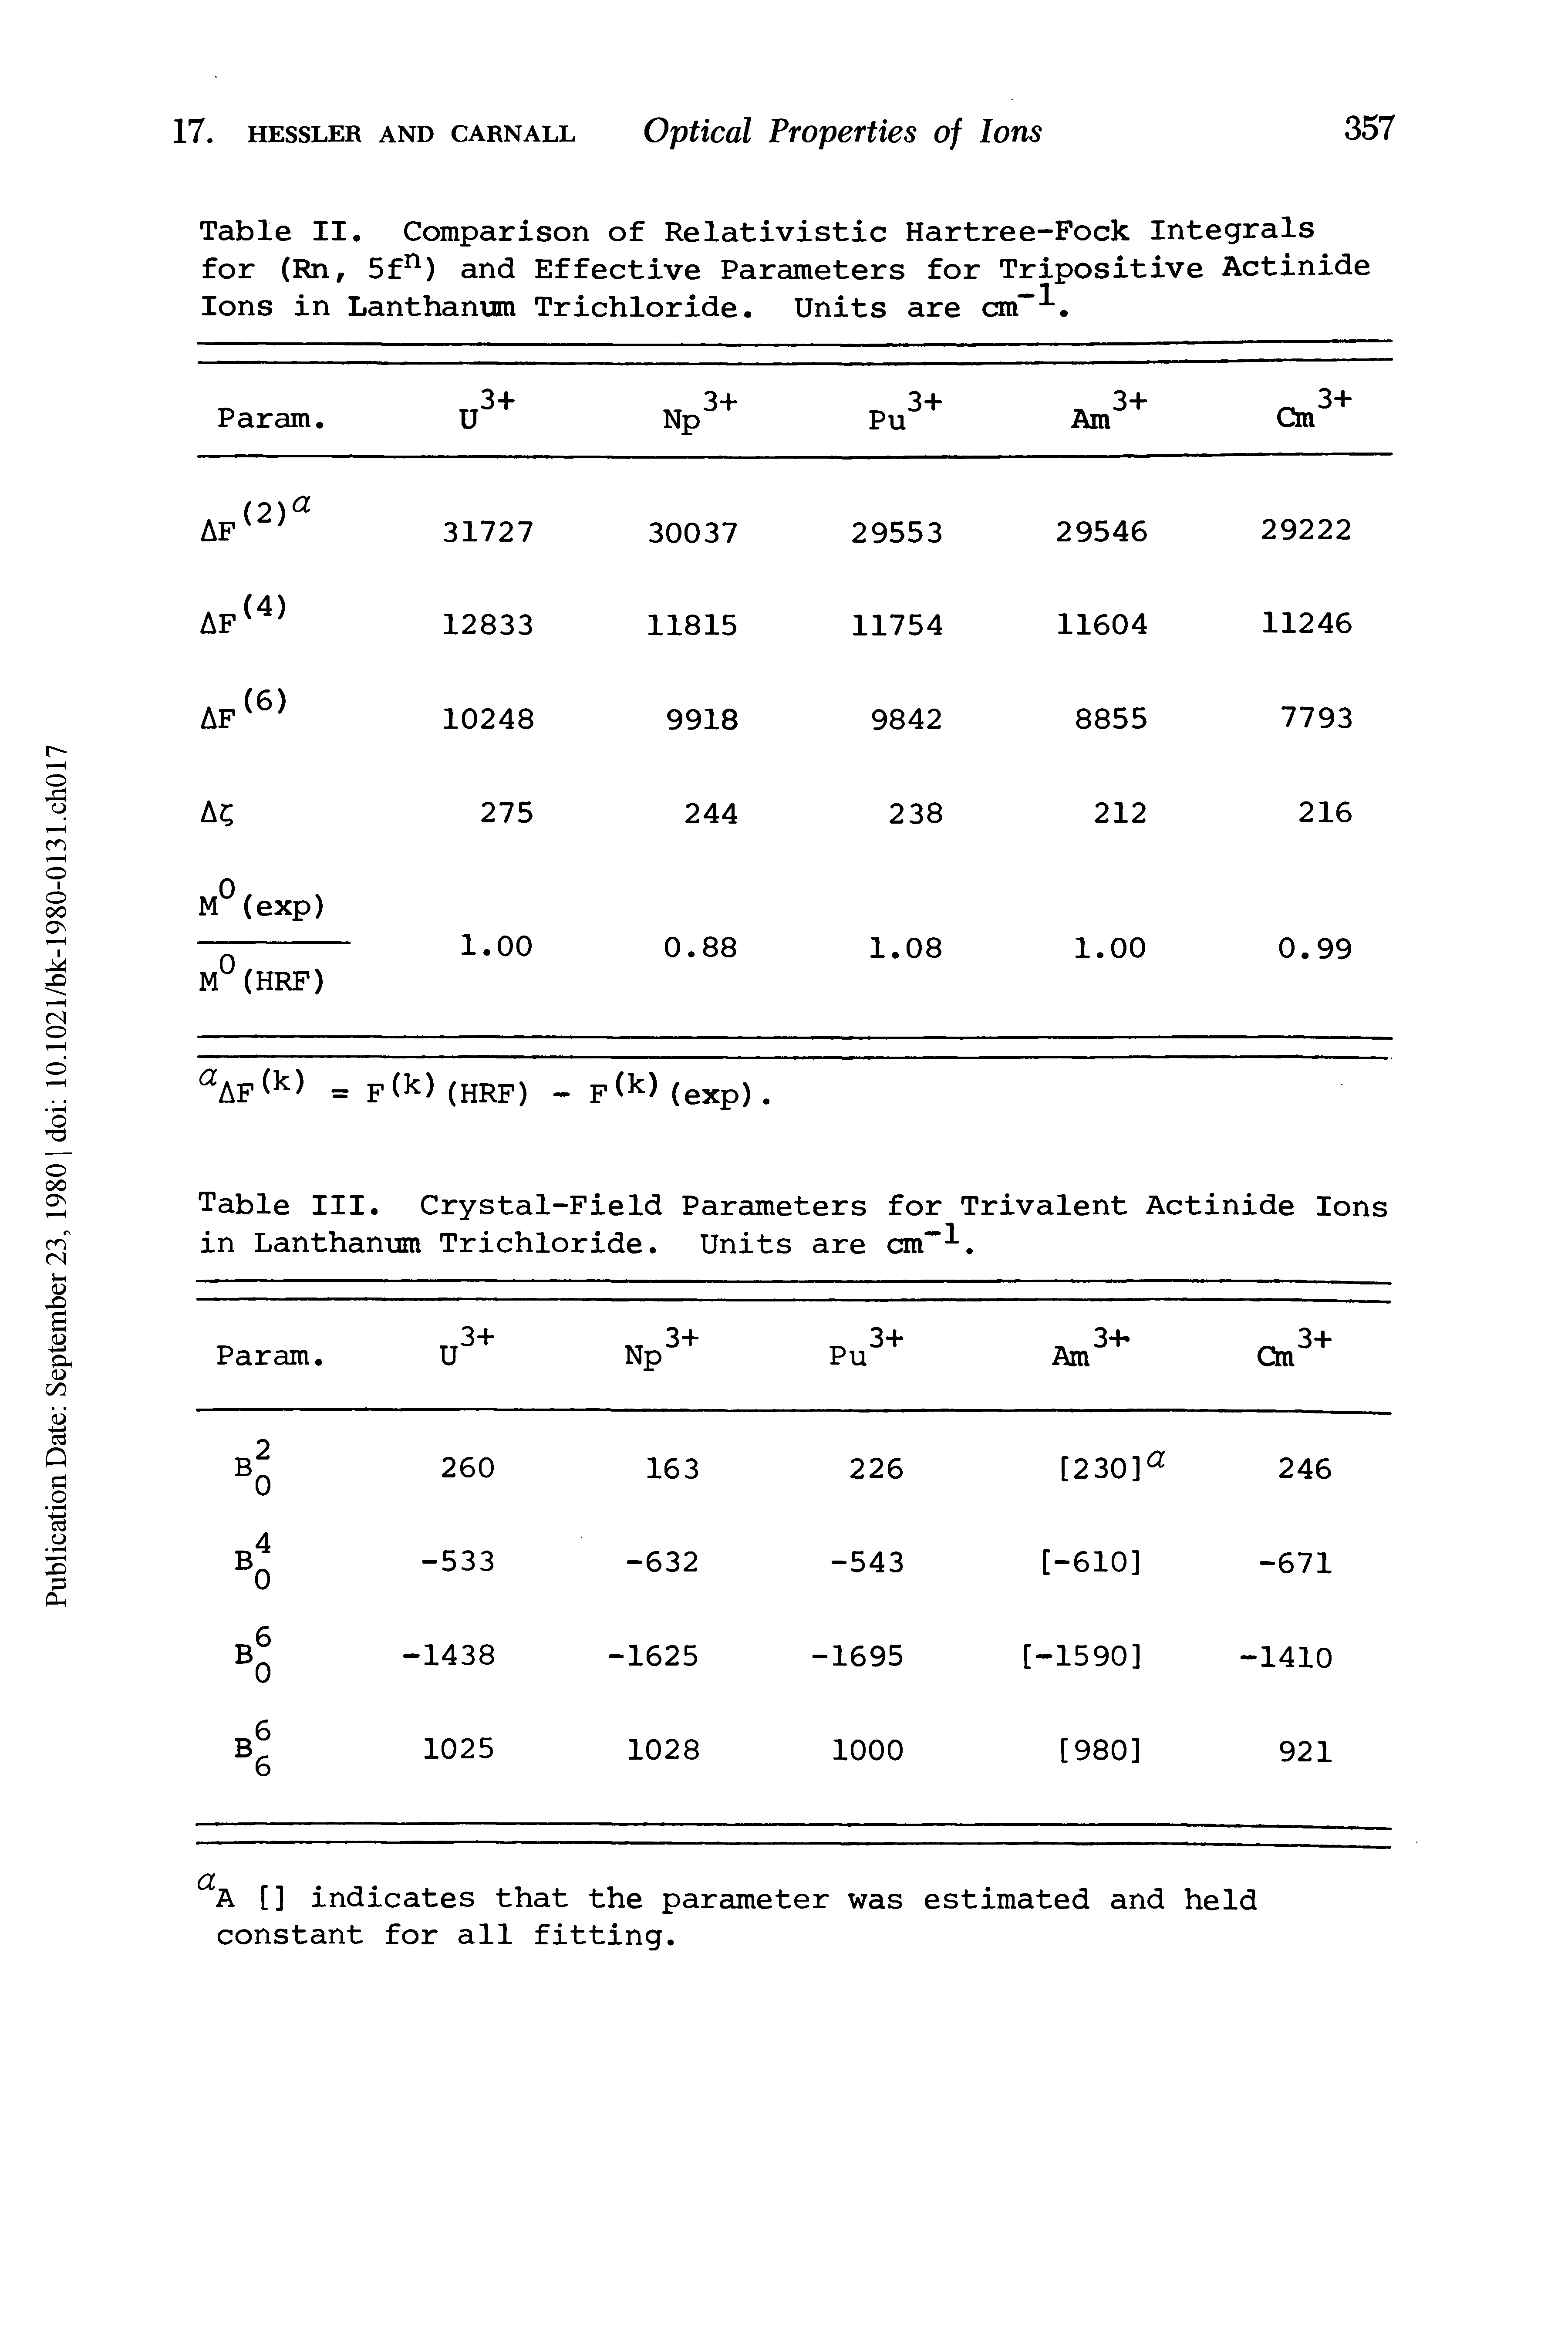 Table III. Crystal-Field Parameters for Trivalent Actinide Ions in Lanthanum Trichloride. Units are cm"-1-.